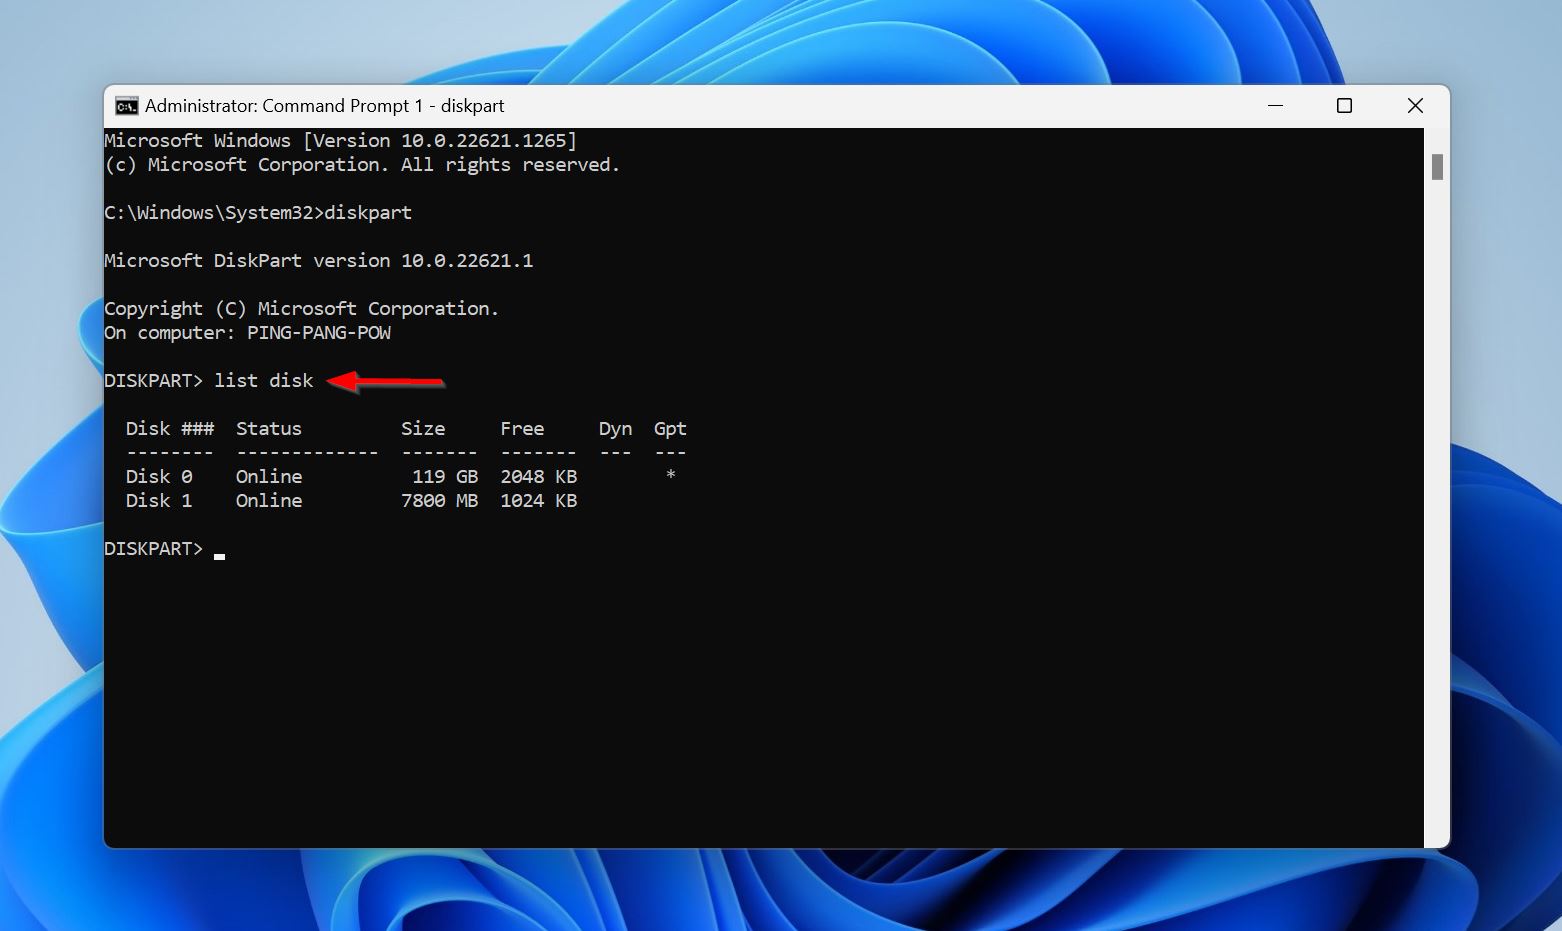 The list disk command in Command Prompt.